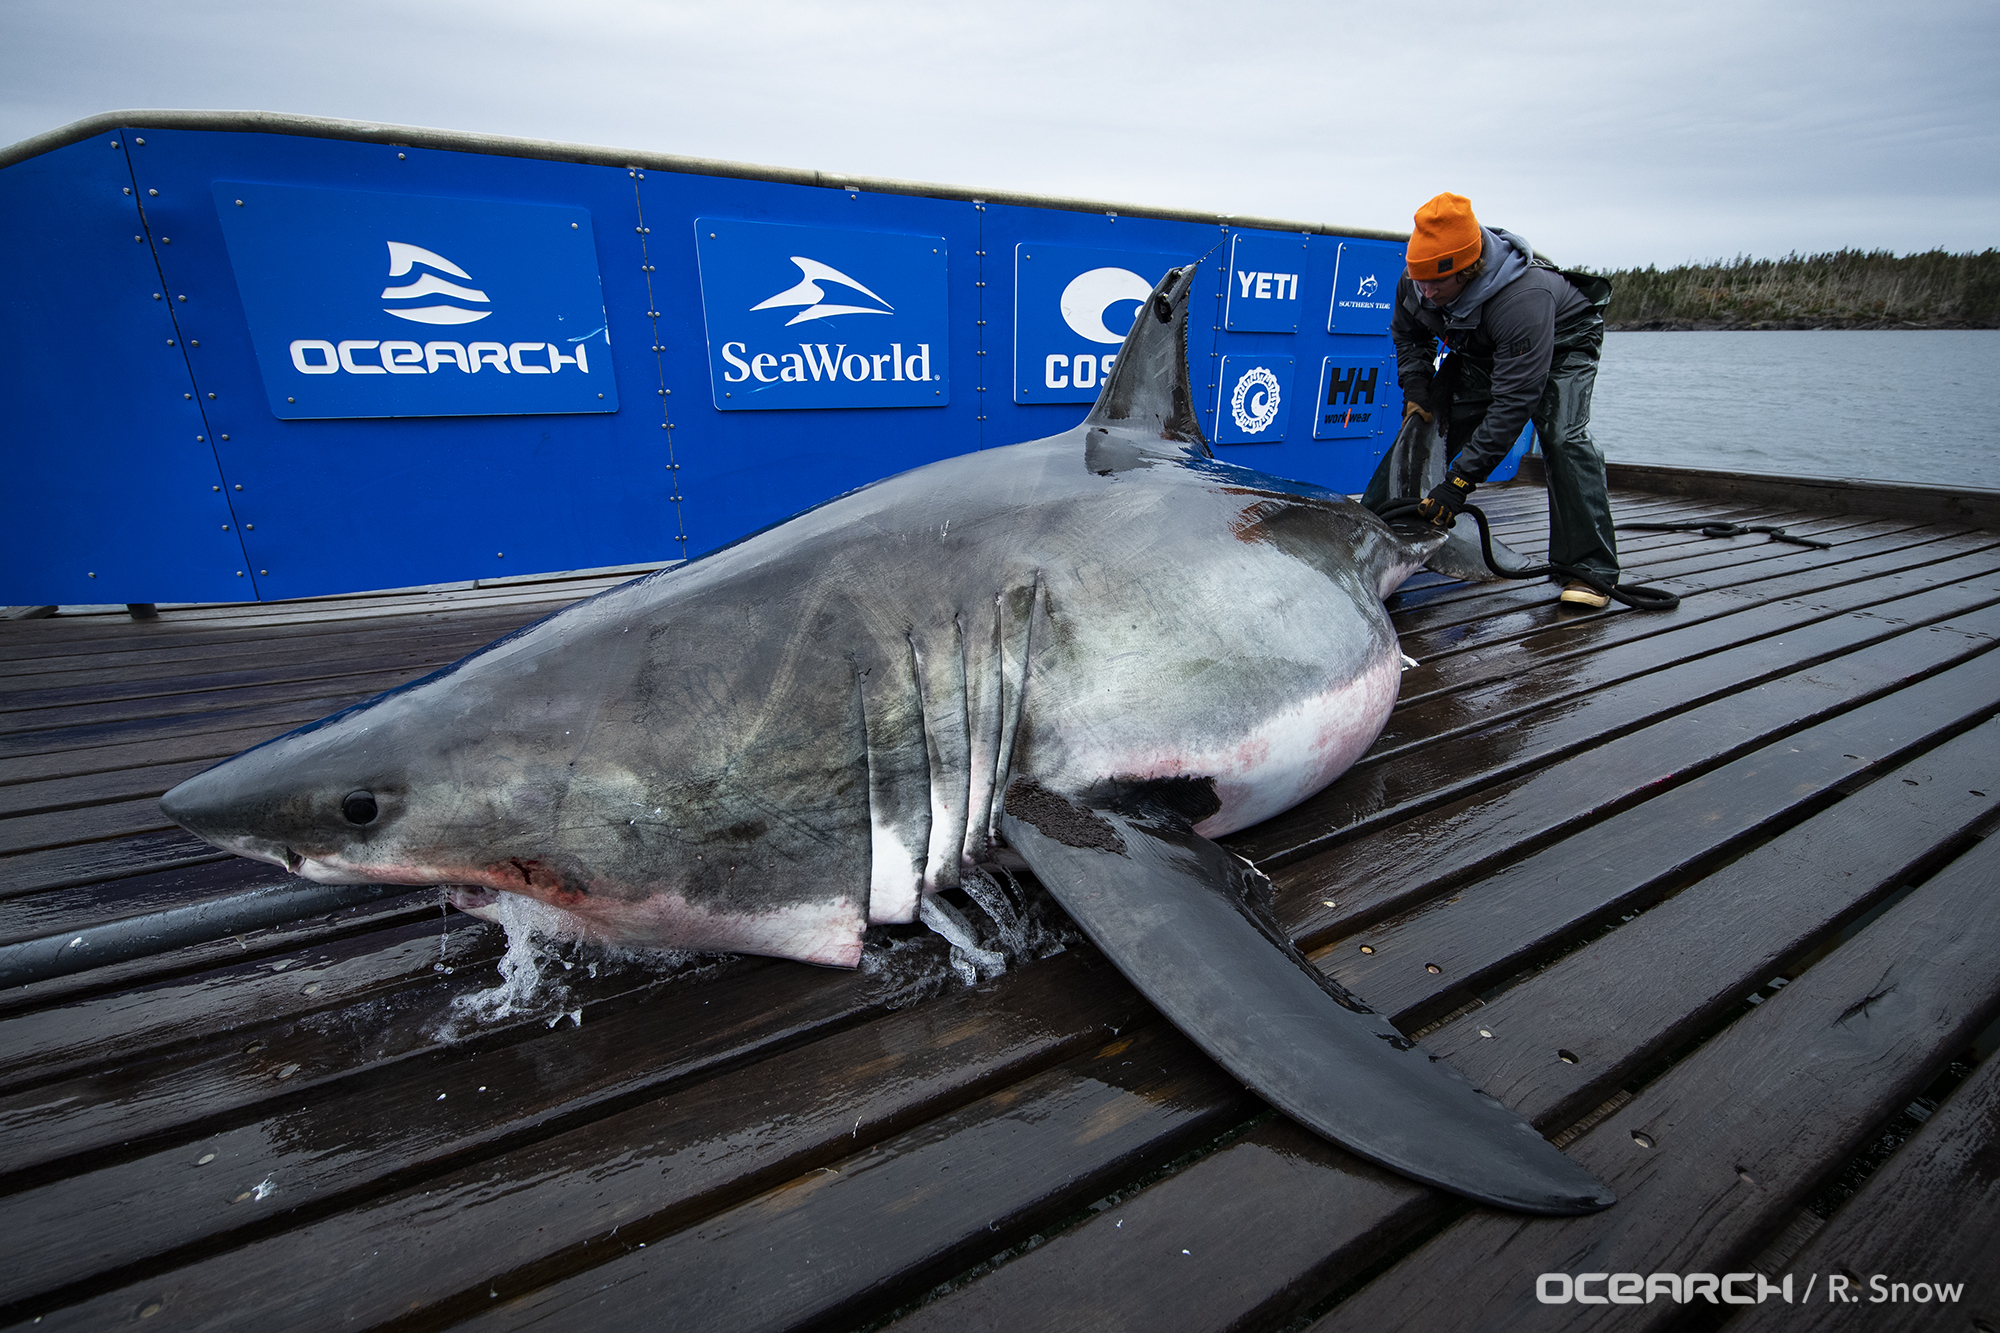 great white shark size